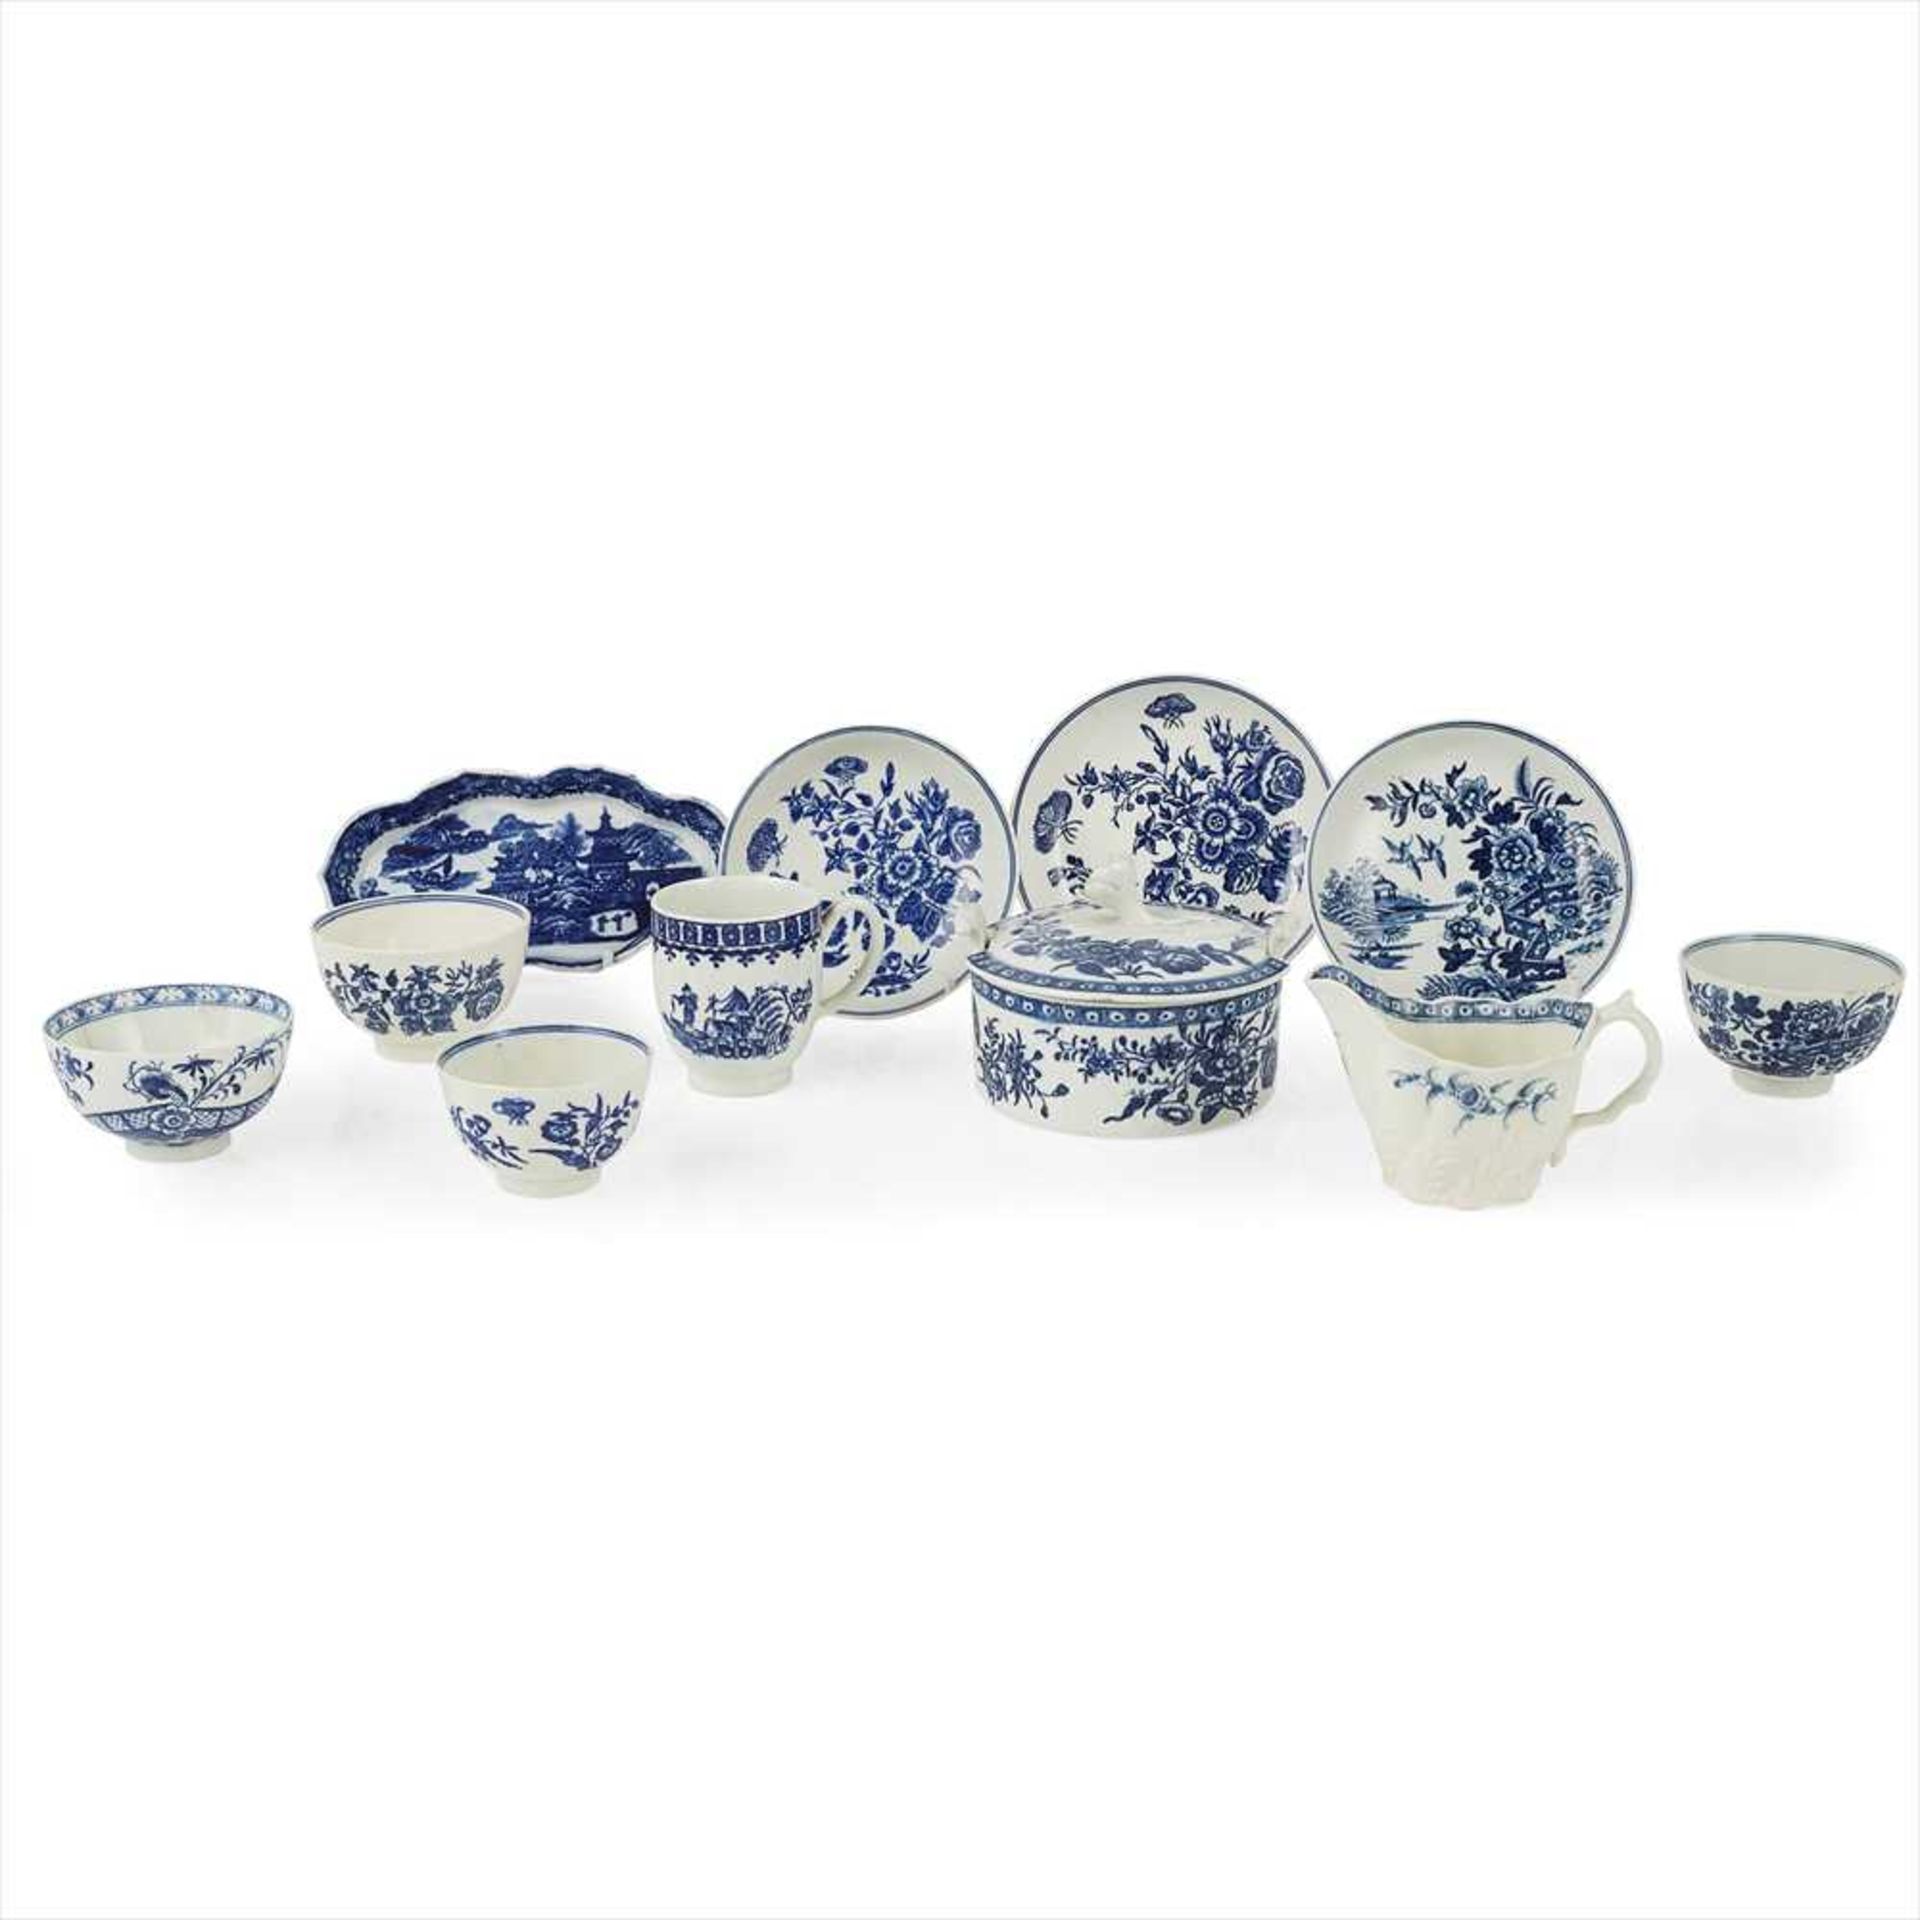 COLLECTION OF ENGLISH BLUE AND WHITE PORCELAIN 18TH CENTURY